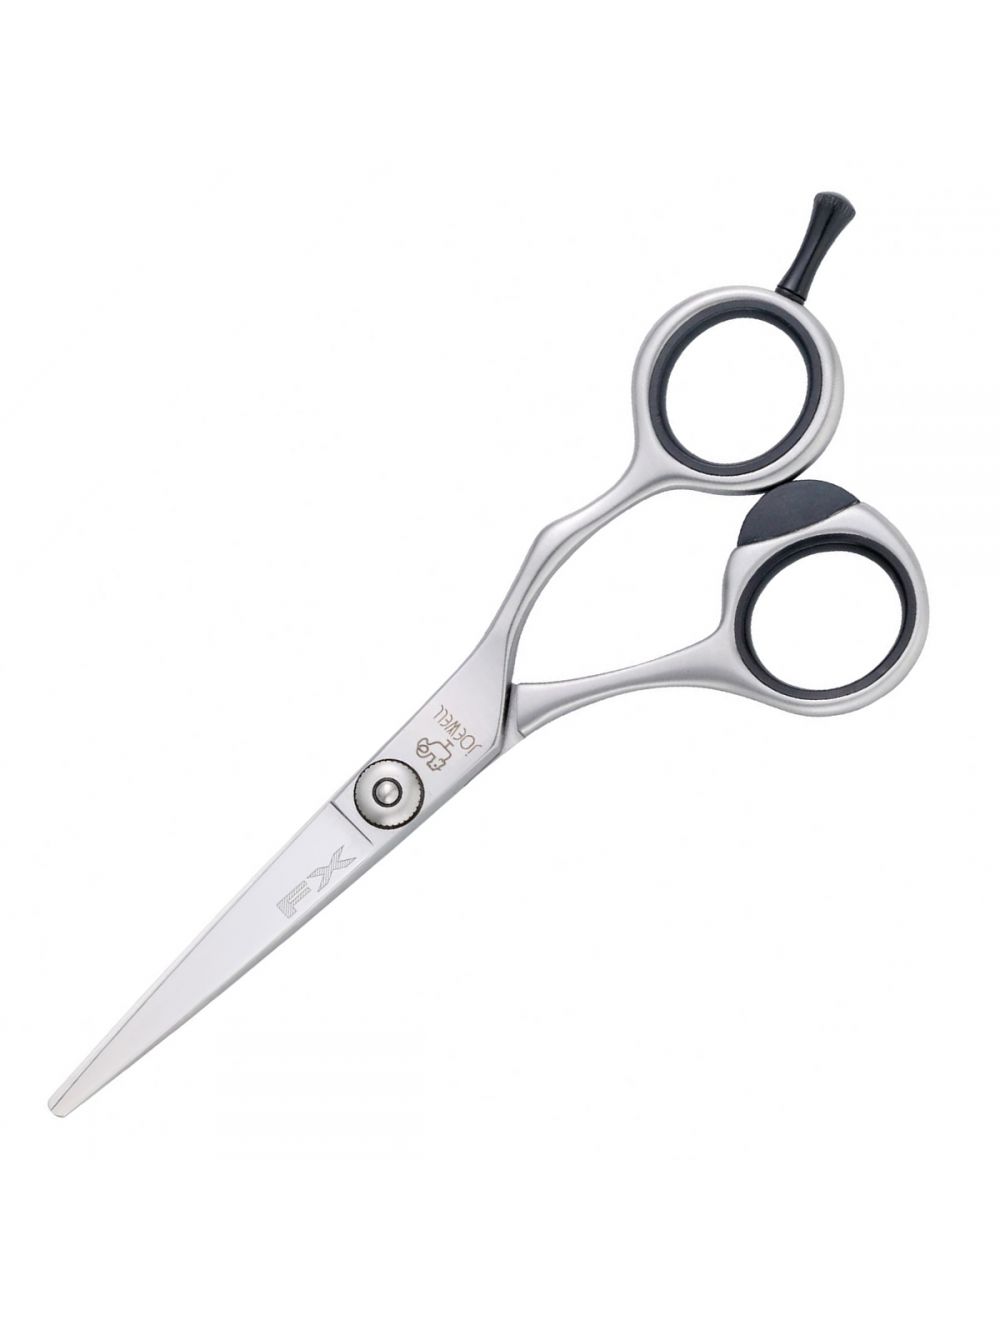 Joewell FX Hairdressing Scissors - Ultimate Hair and Beauty